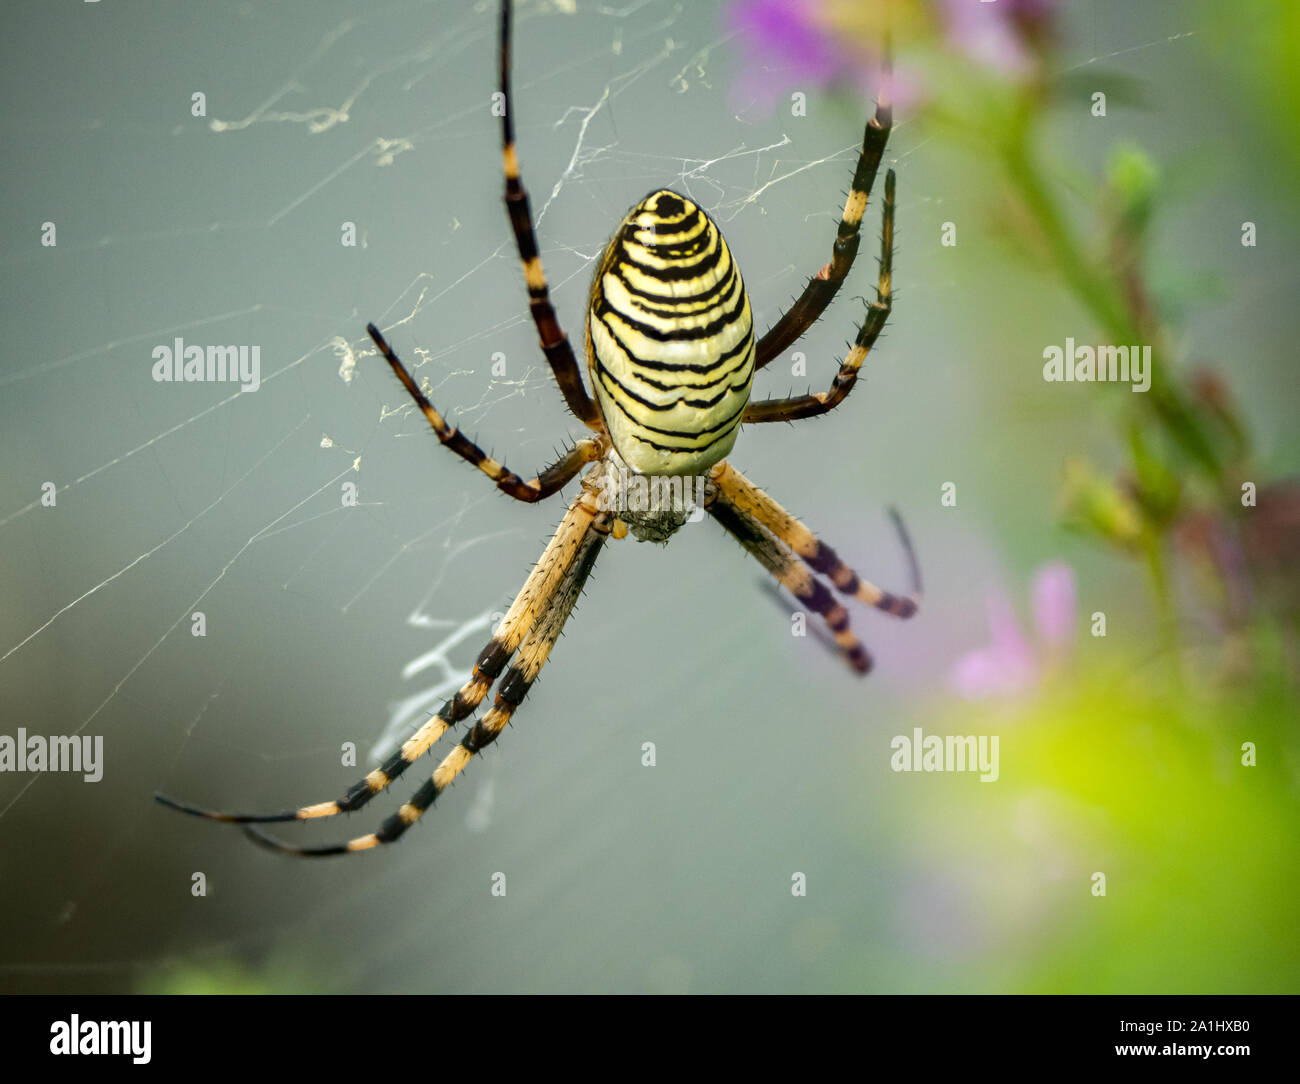 A wasp spider -Argiope bruennichi- rests in its web in a Japanese park. Stock Photo